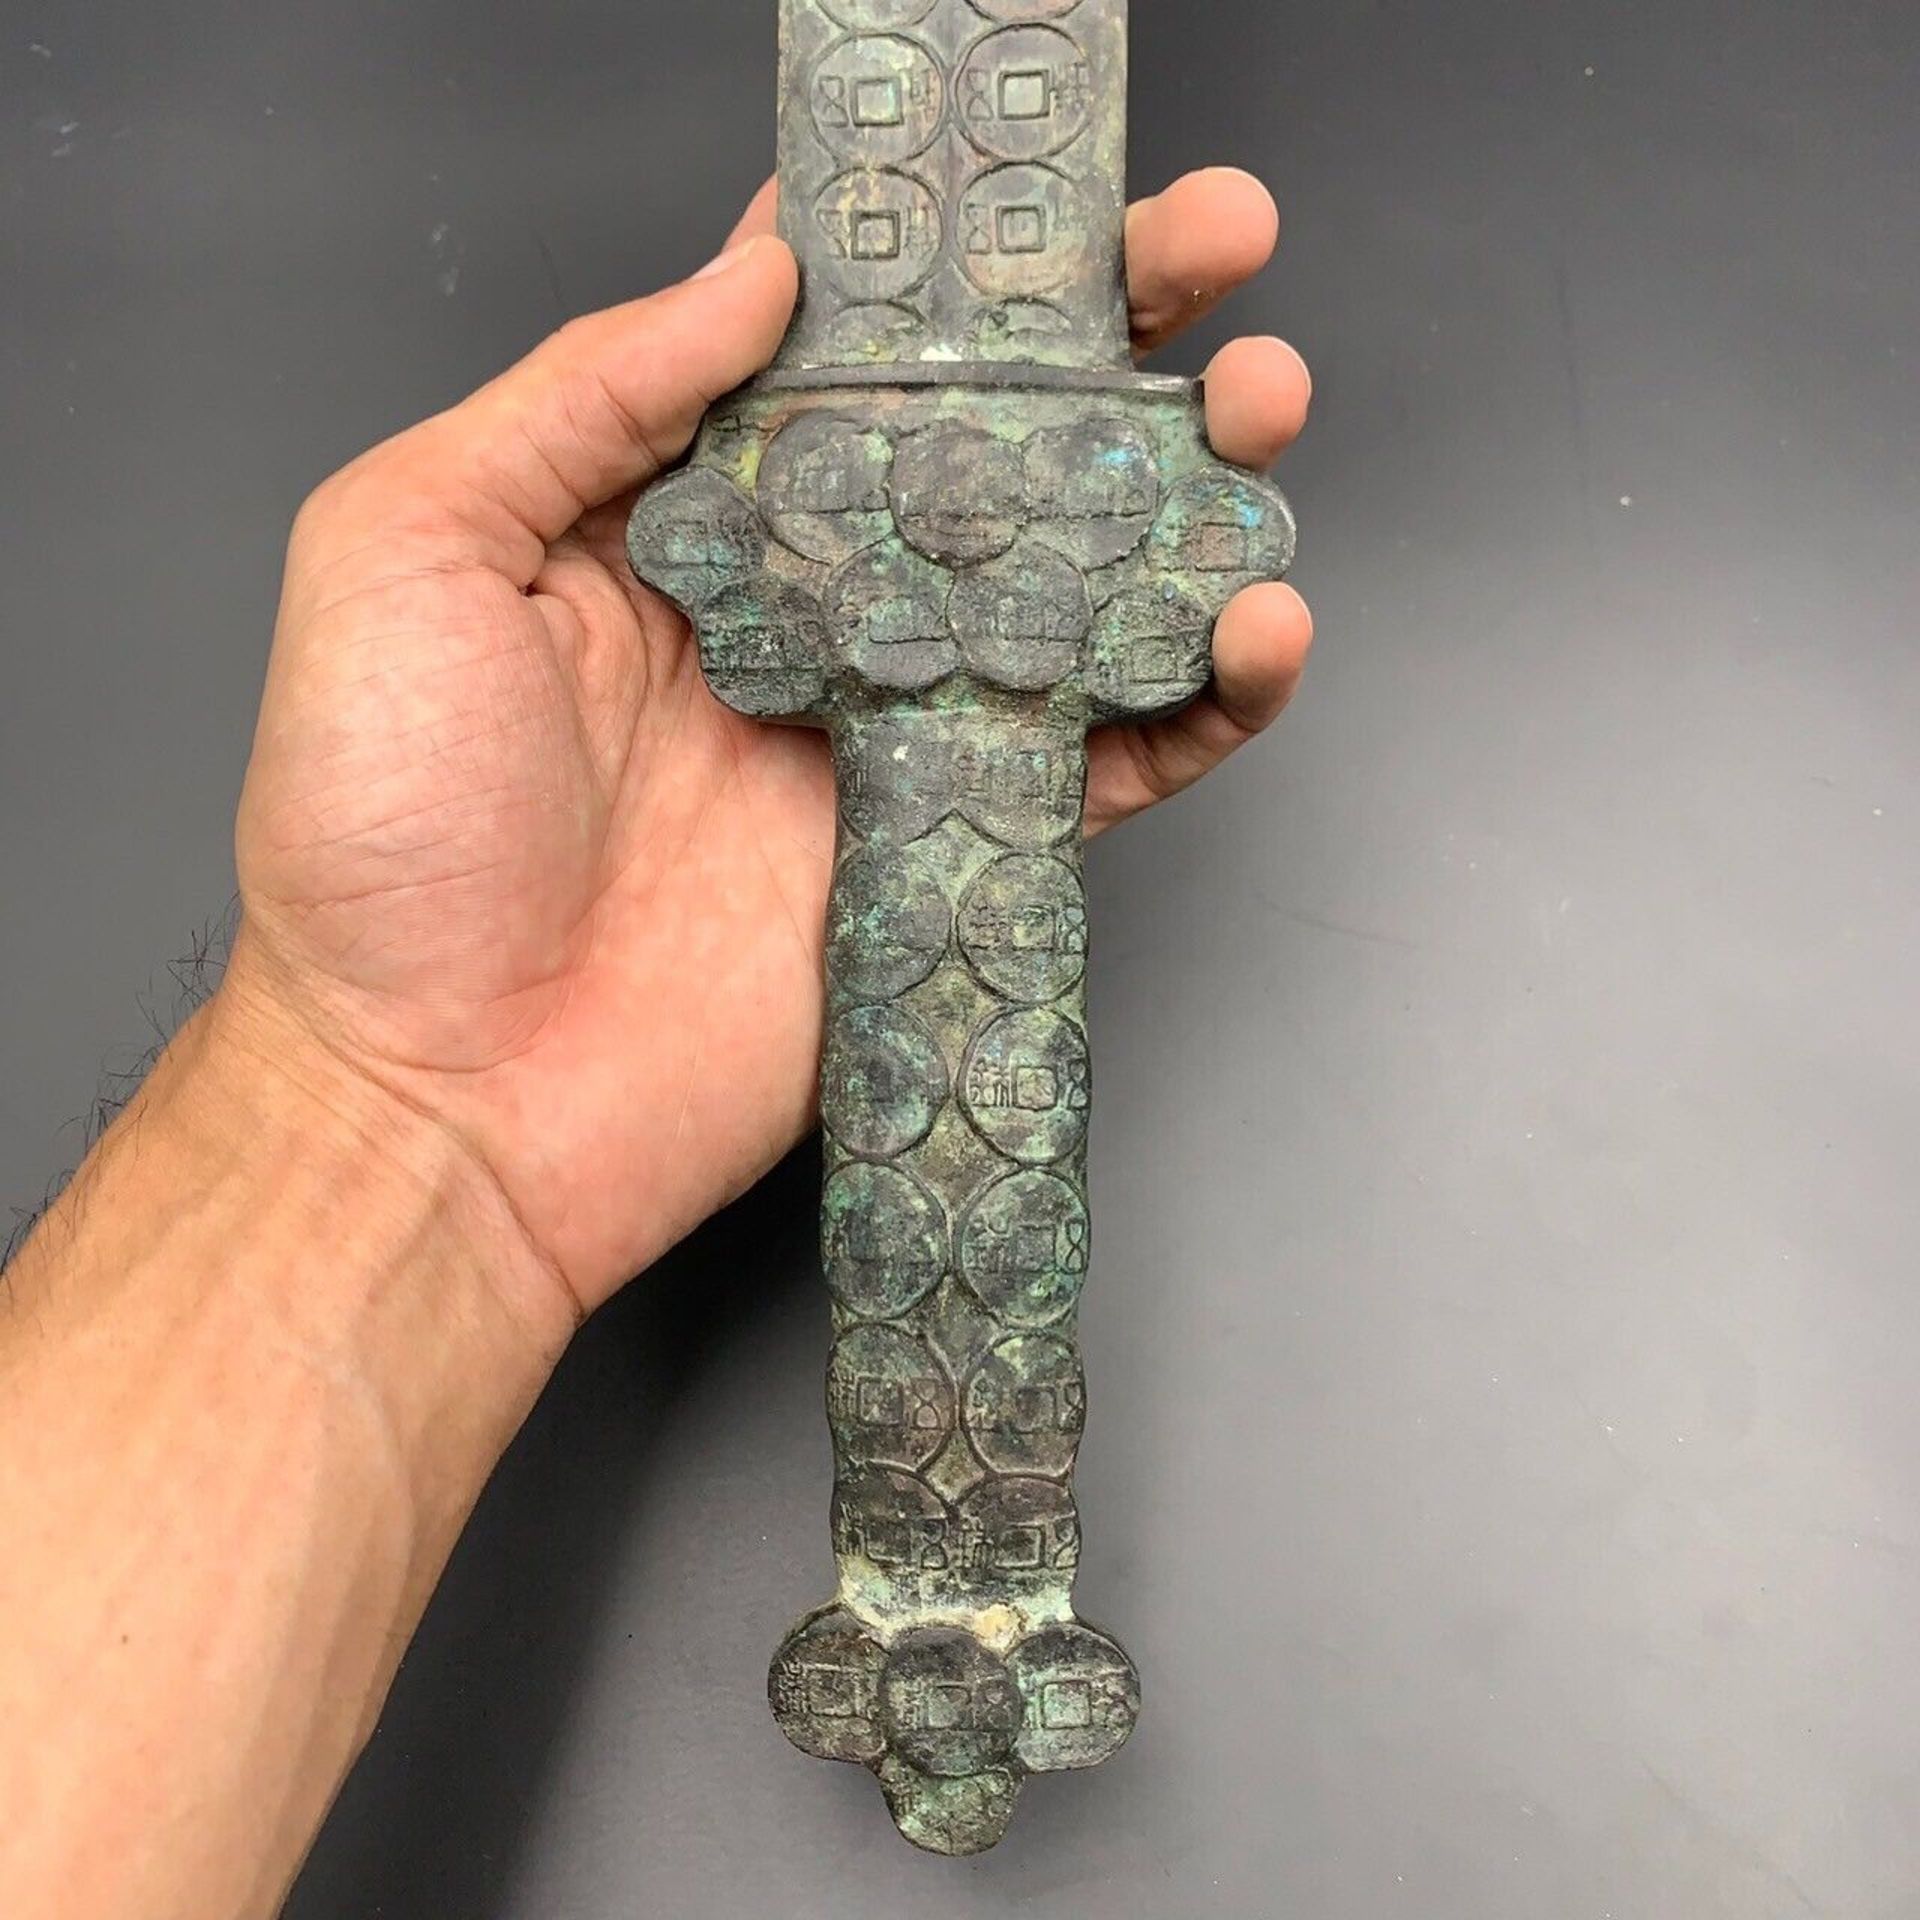 Incredible Rare Handcrafted Art Antique Asian Wonderful Bronze Sword - Image 5 of 9